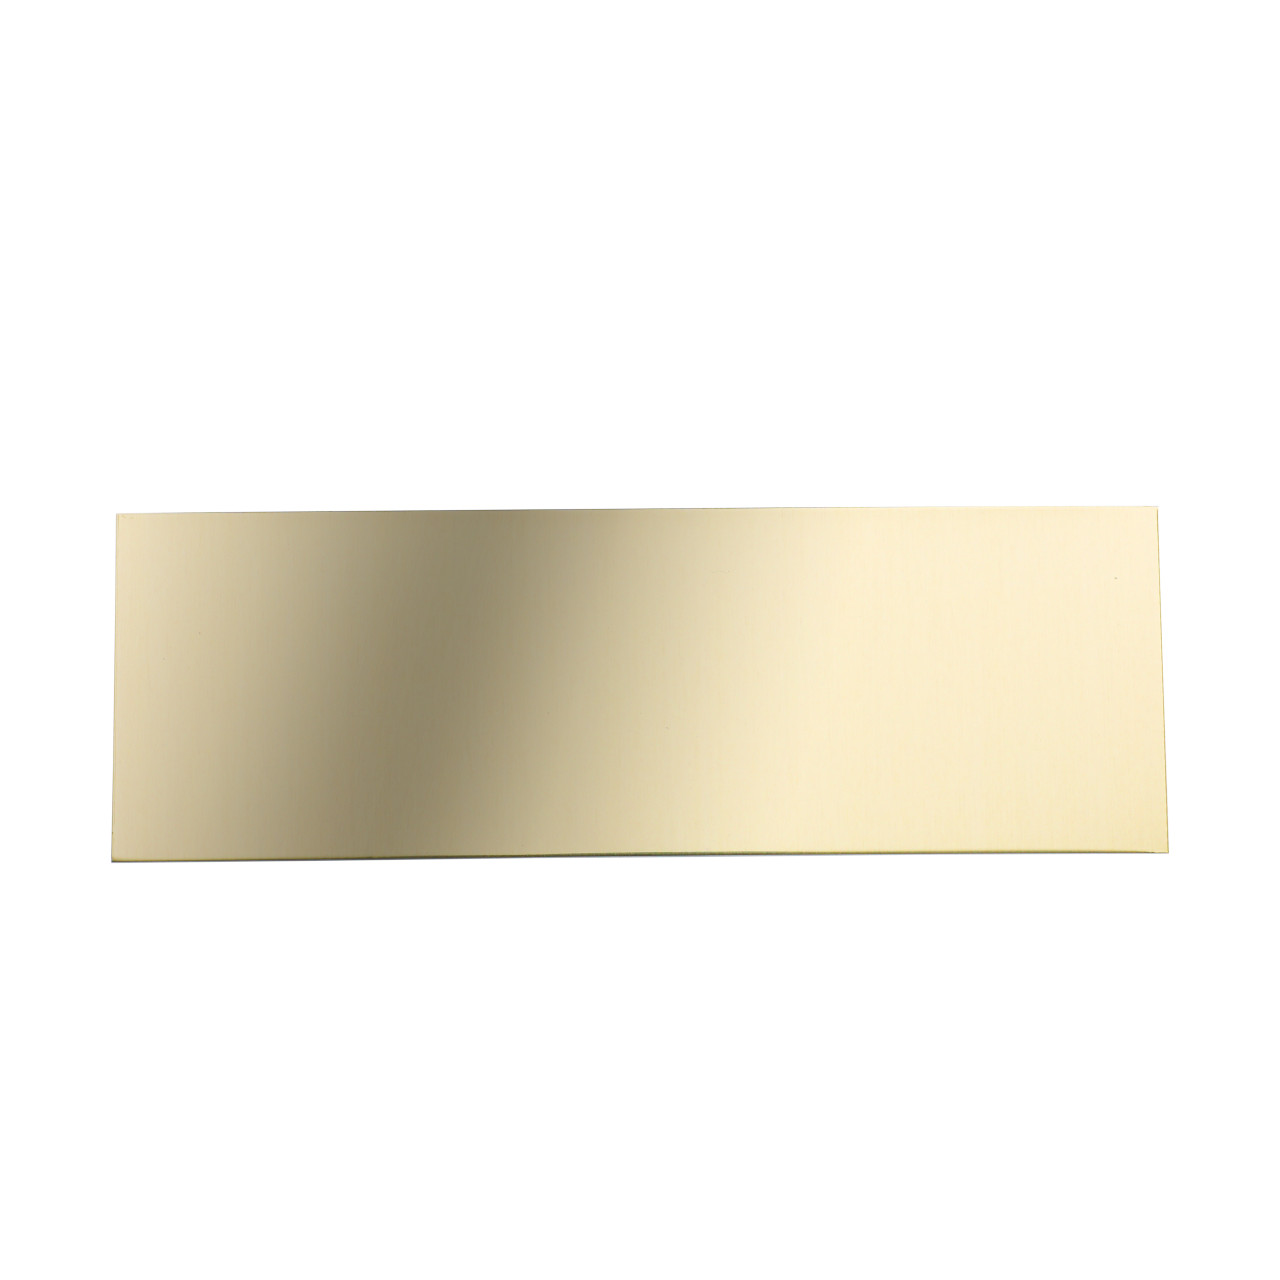 Plate for Trophies Gold or Silver PLAIN METAL TROPHY PLAQUE MULTIPLE SIZES 